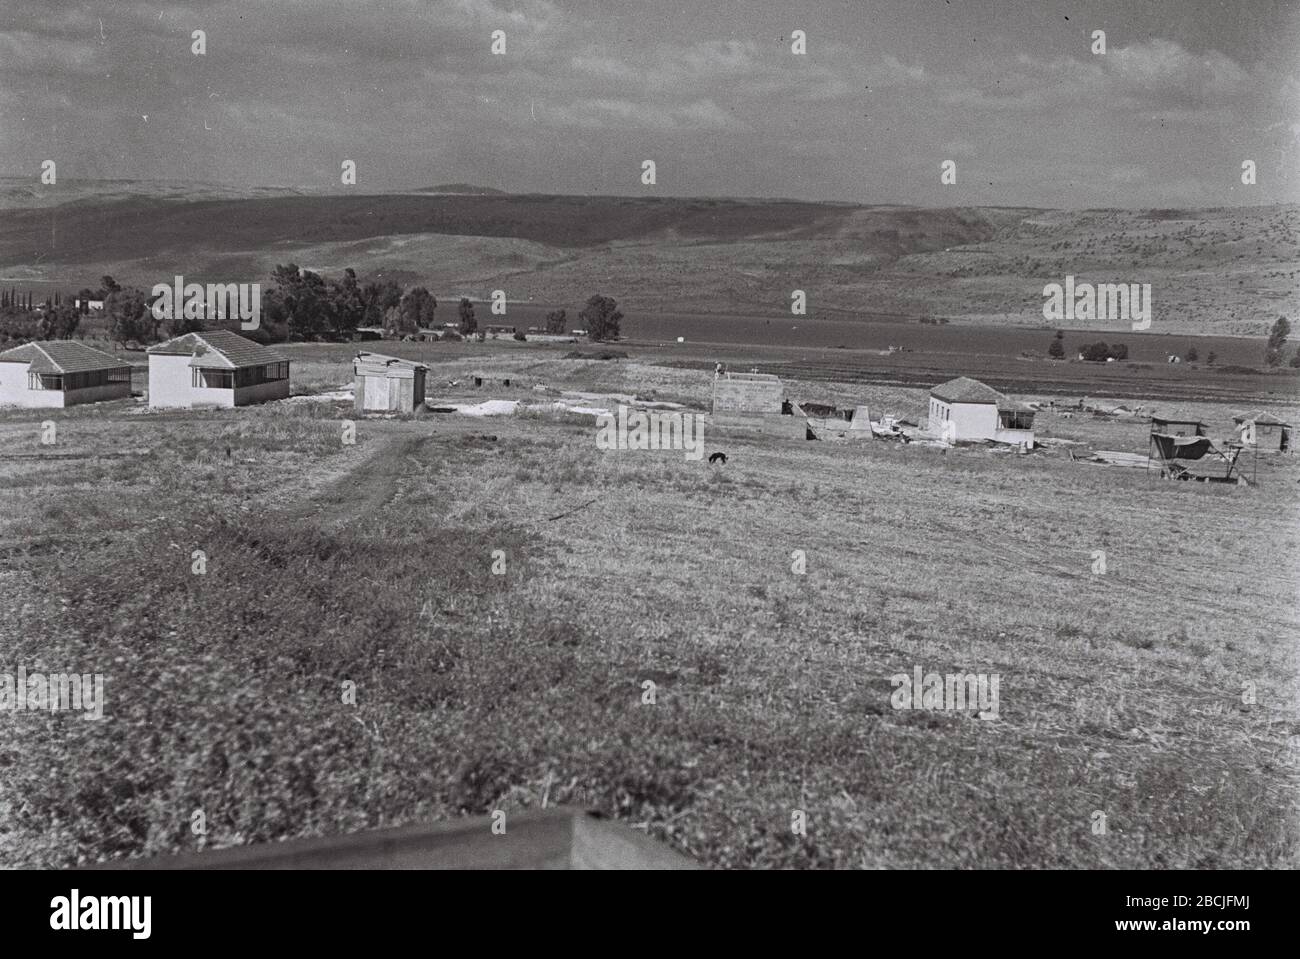 English Kibbutz Sde Nehemia In The Upper Galilee Ss O E I C I I O U O I E I U O U I U O I U 30 September 1946 This Is Available From National Photo Collection Of Israel Photography Dept Goverment Press Office